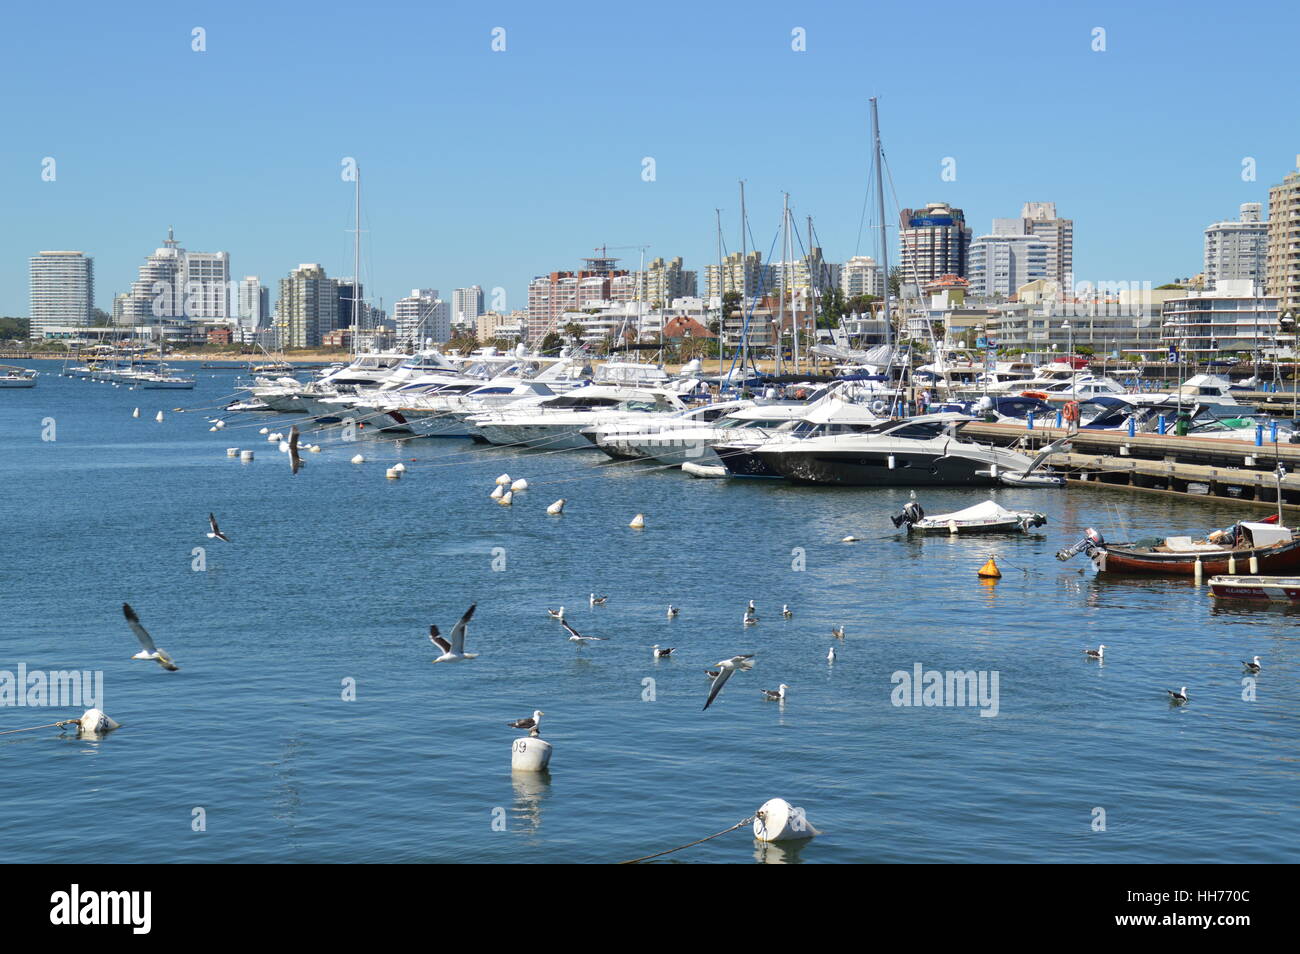 Yachts and boats docked at the scenic port of Punta del Este in Uruguay. Stock Photo